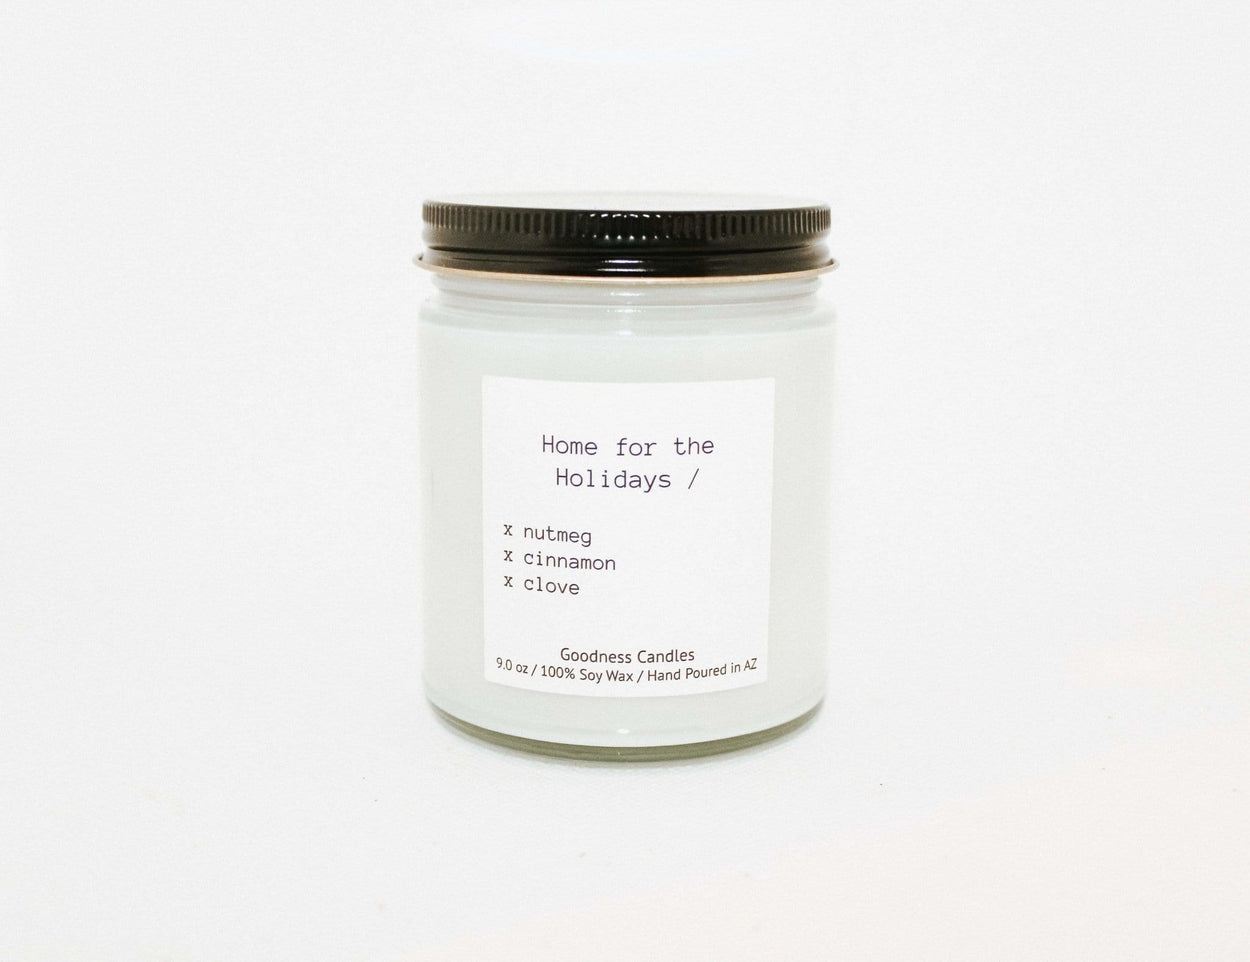 Home for the Holidays- 9 oz Goodness Candles